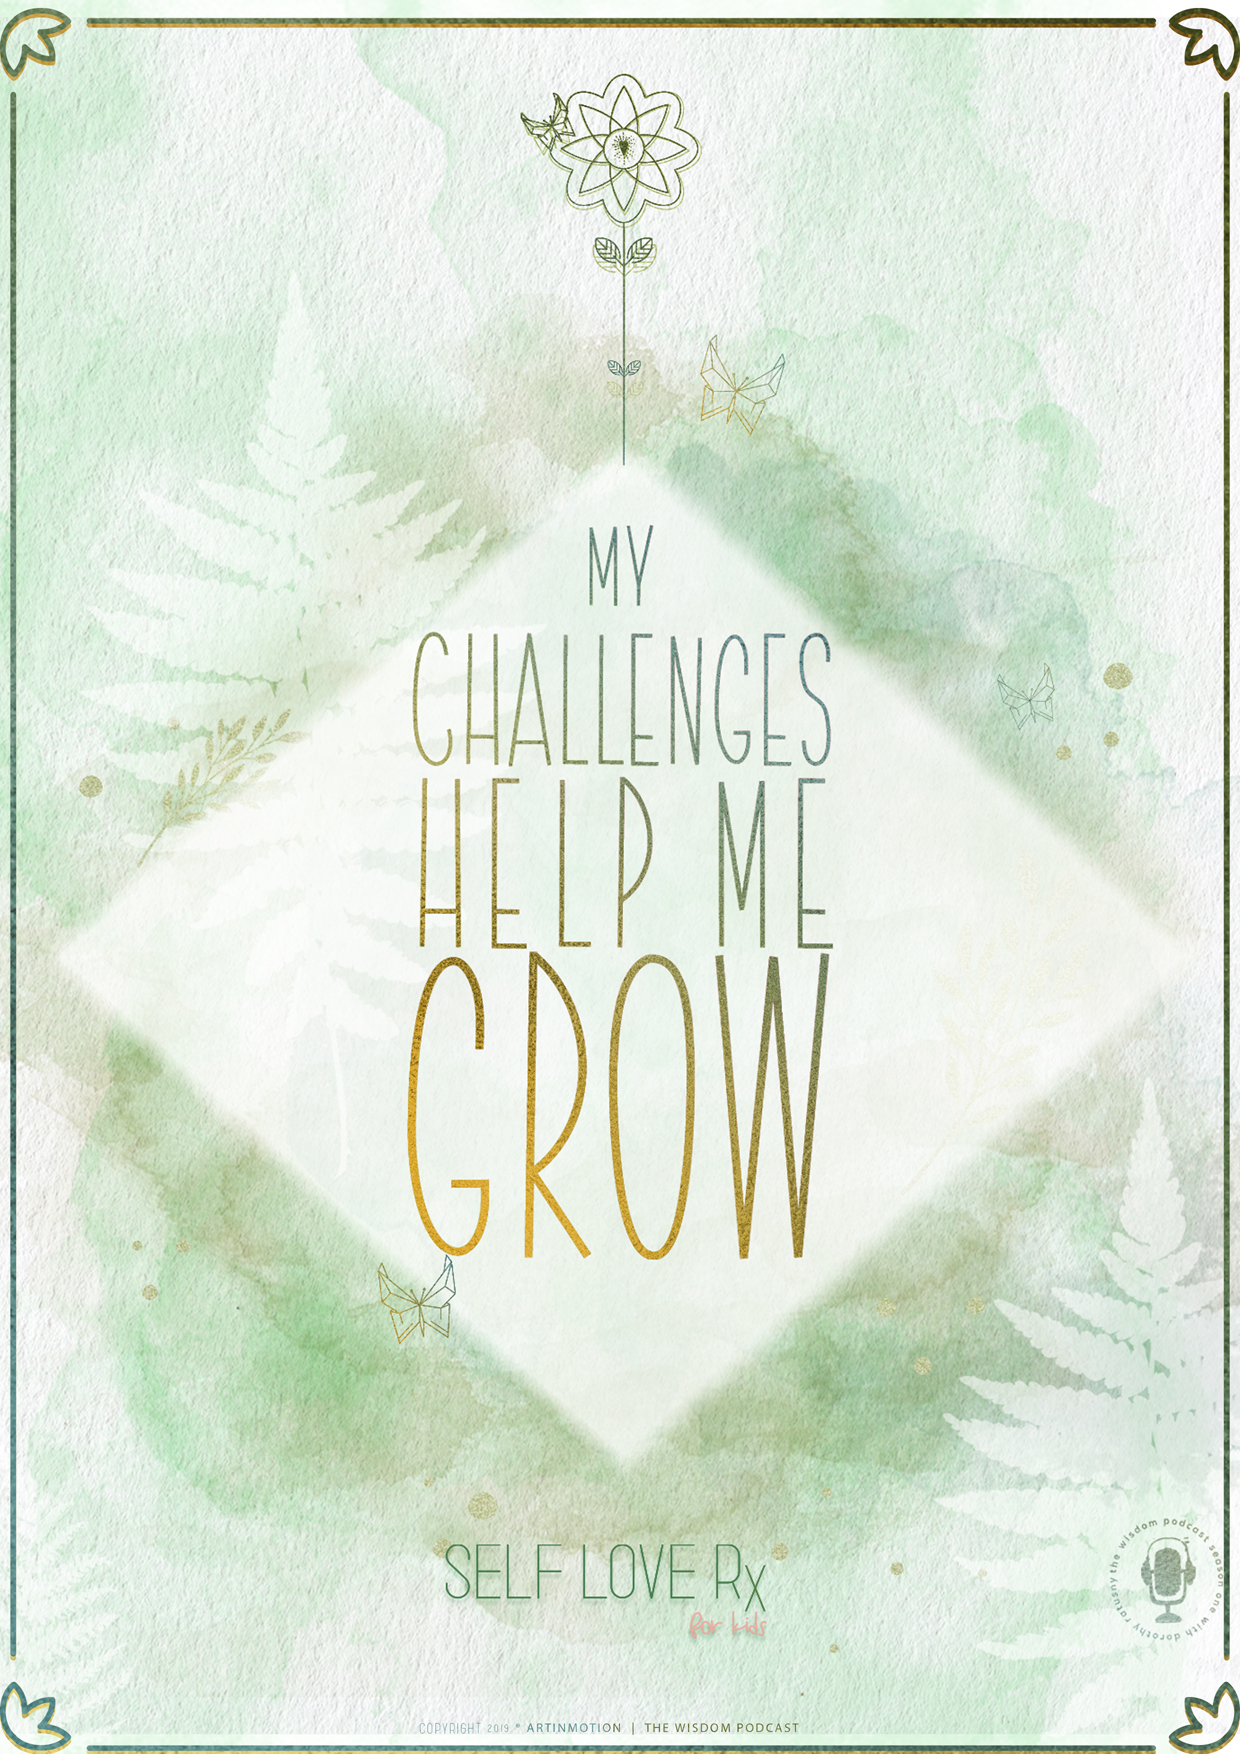 my challenge help me grow - daily affirmation card from the Self-love Rx for kids card deck - teaching children how to love and value themselves | the wisdom podcast season 1 episode 9